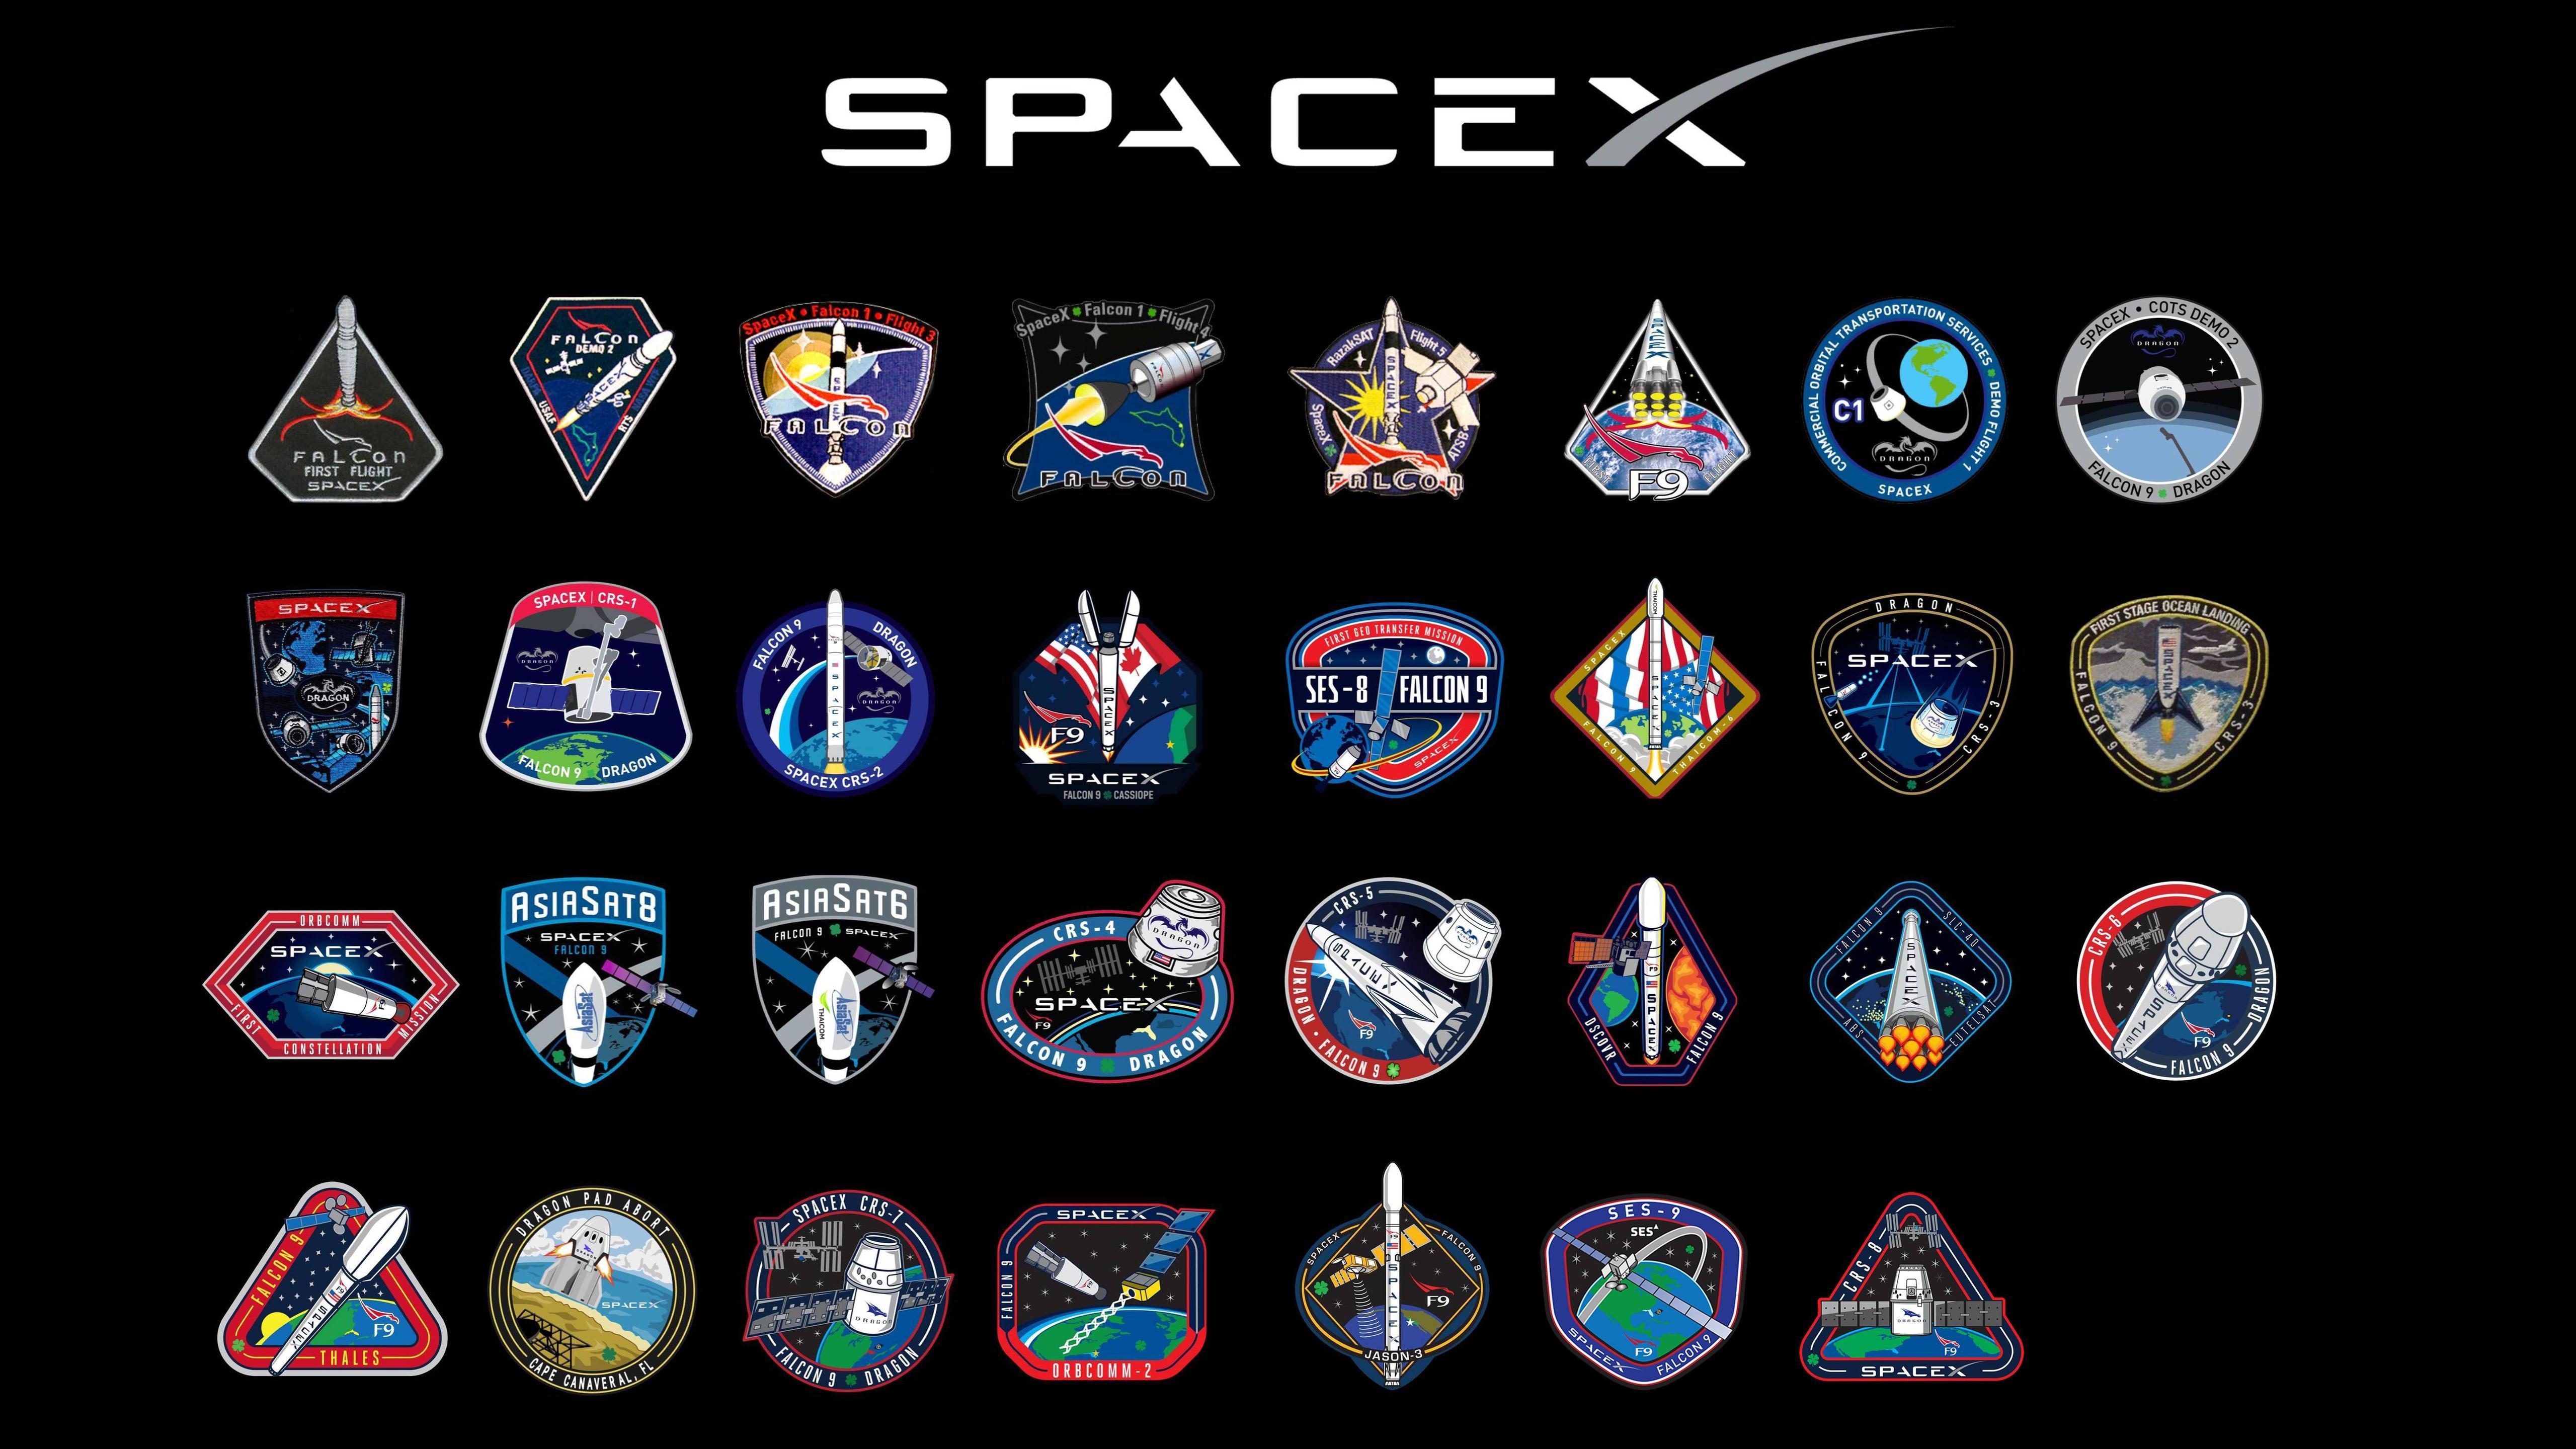 SpaceX Mission Logo - SpaceX Mission Patch Wallpaper (16:9) : spacex